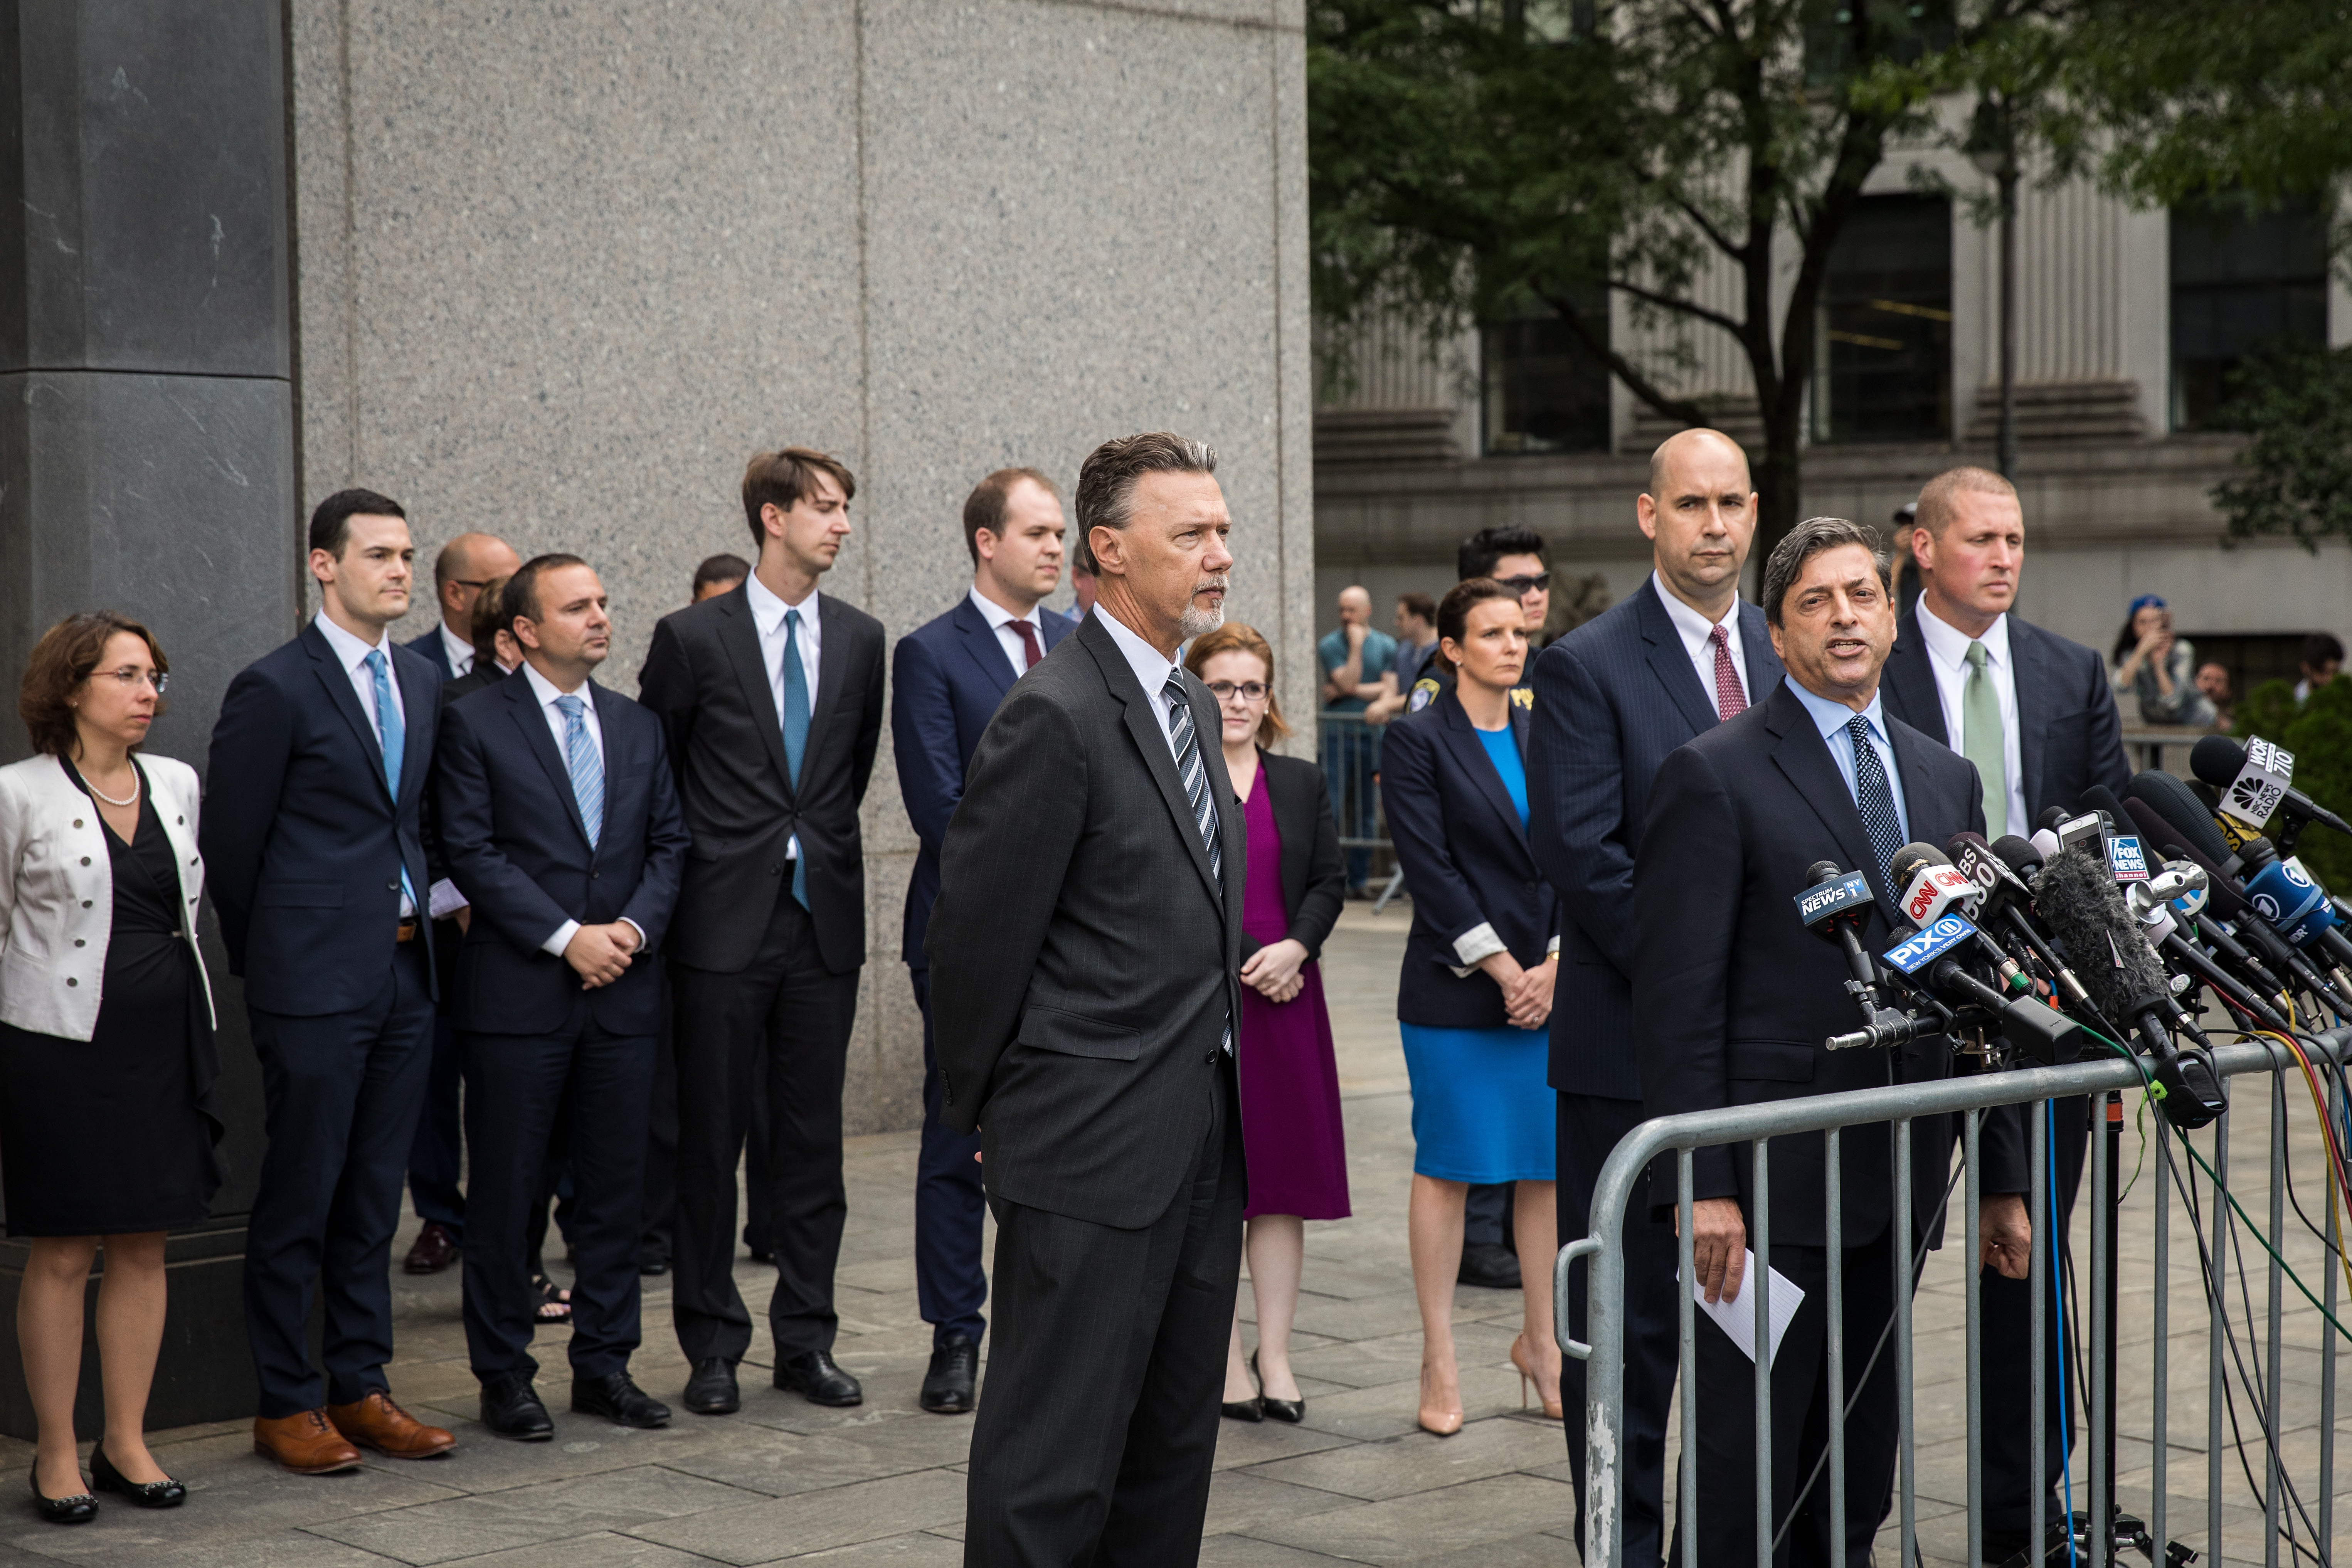 NEW YORK, NY - AUGUST 21: Surrounded by his team of lawyers, Deputy U.S. Attorney for the Southern District of New York Robert Khuzami speaks to the media about the Michael Cohen case outside of federal court, August 21, 2018 in New York City. Cohen reached a plea agreement with prosecutors involving charges of bank fraud, tax fraud and campaign finance violations. (Photo by Drew Angerer/Getty Images)